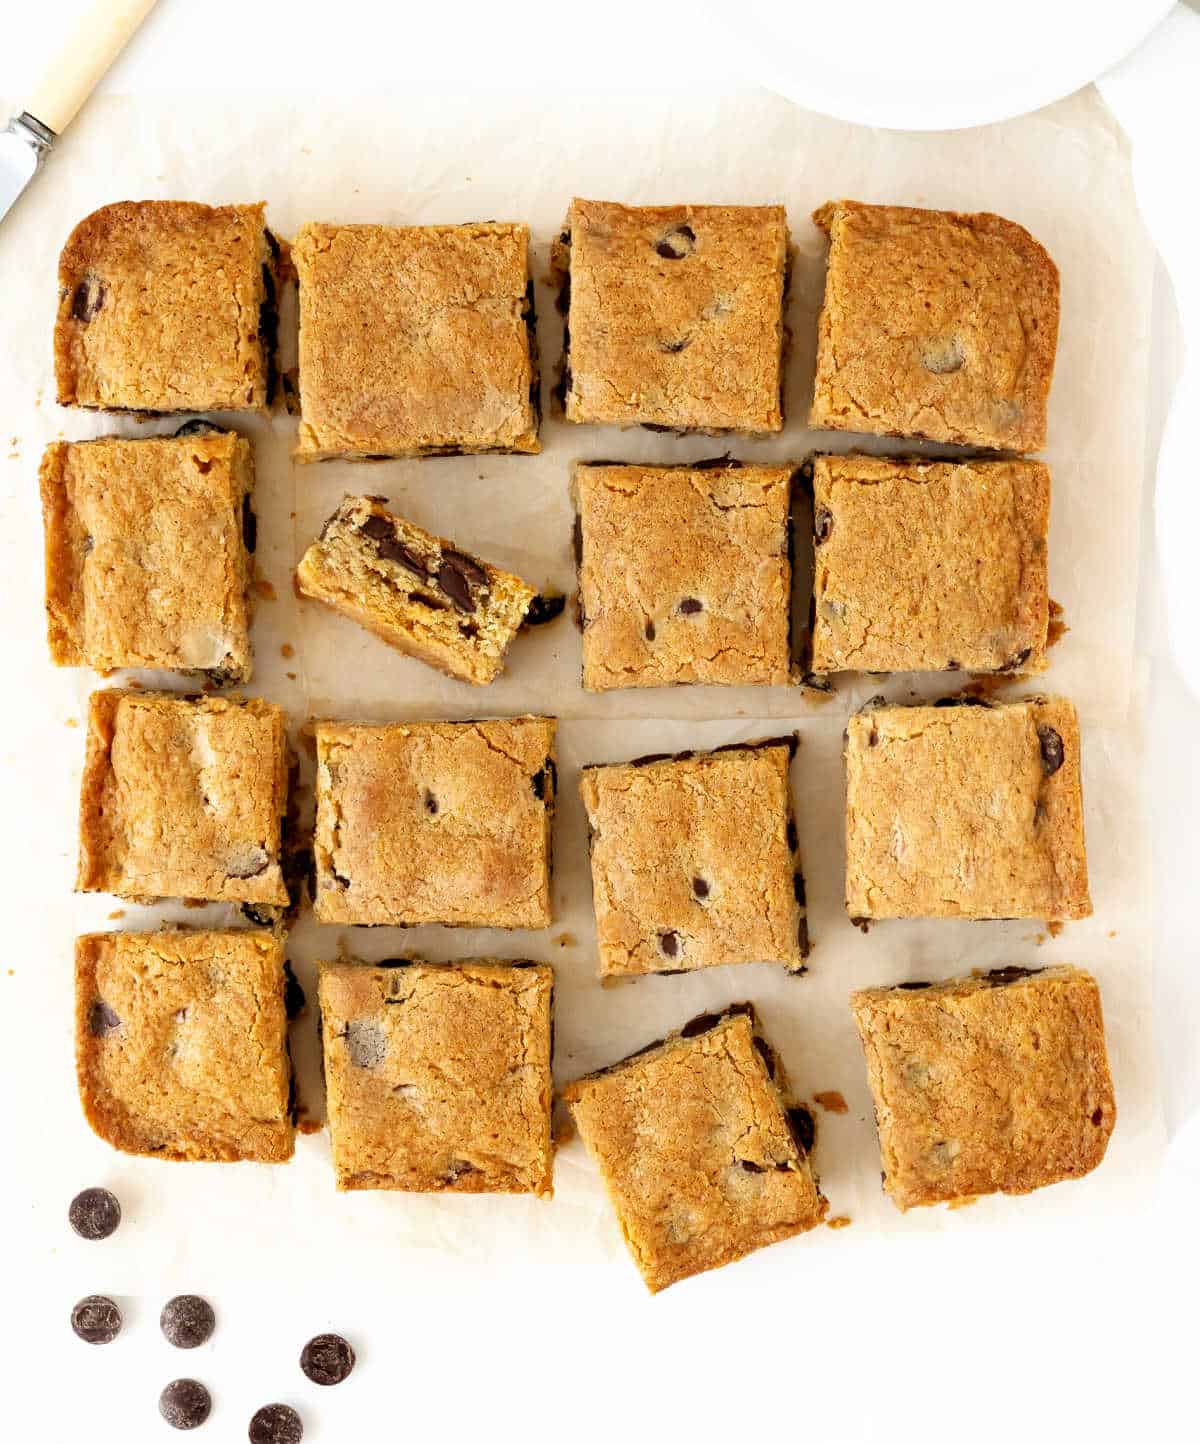 Top view of chocolate chip blondies squares on a whitish surface.